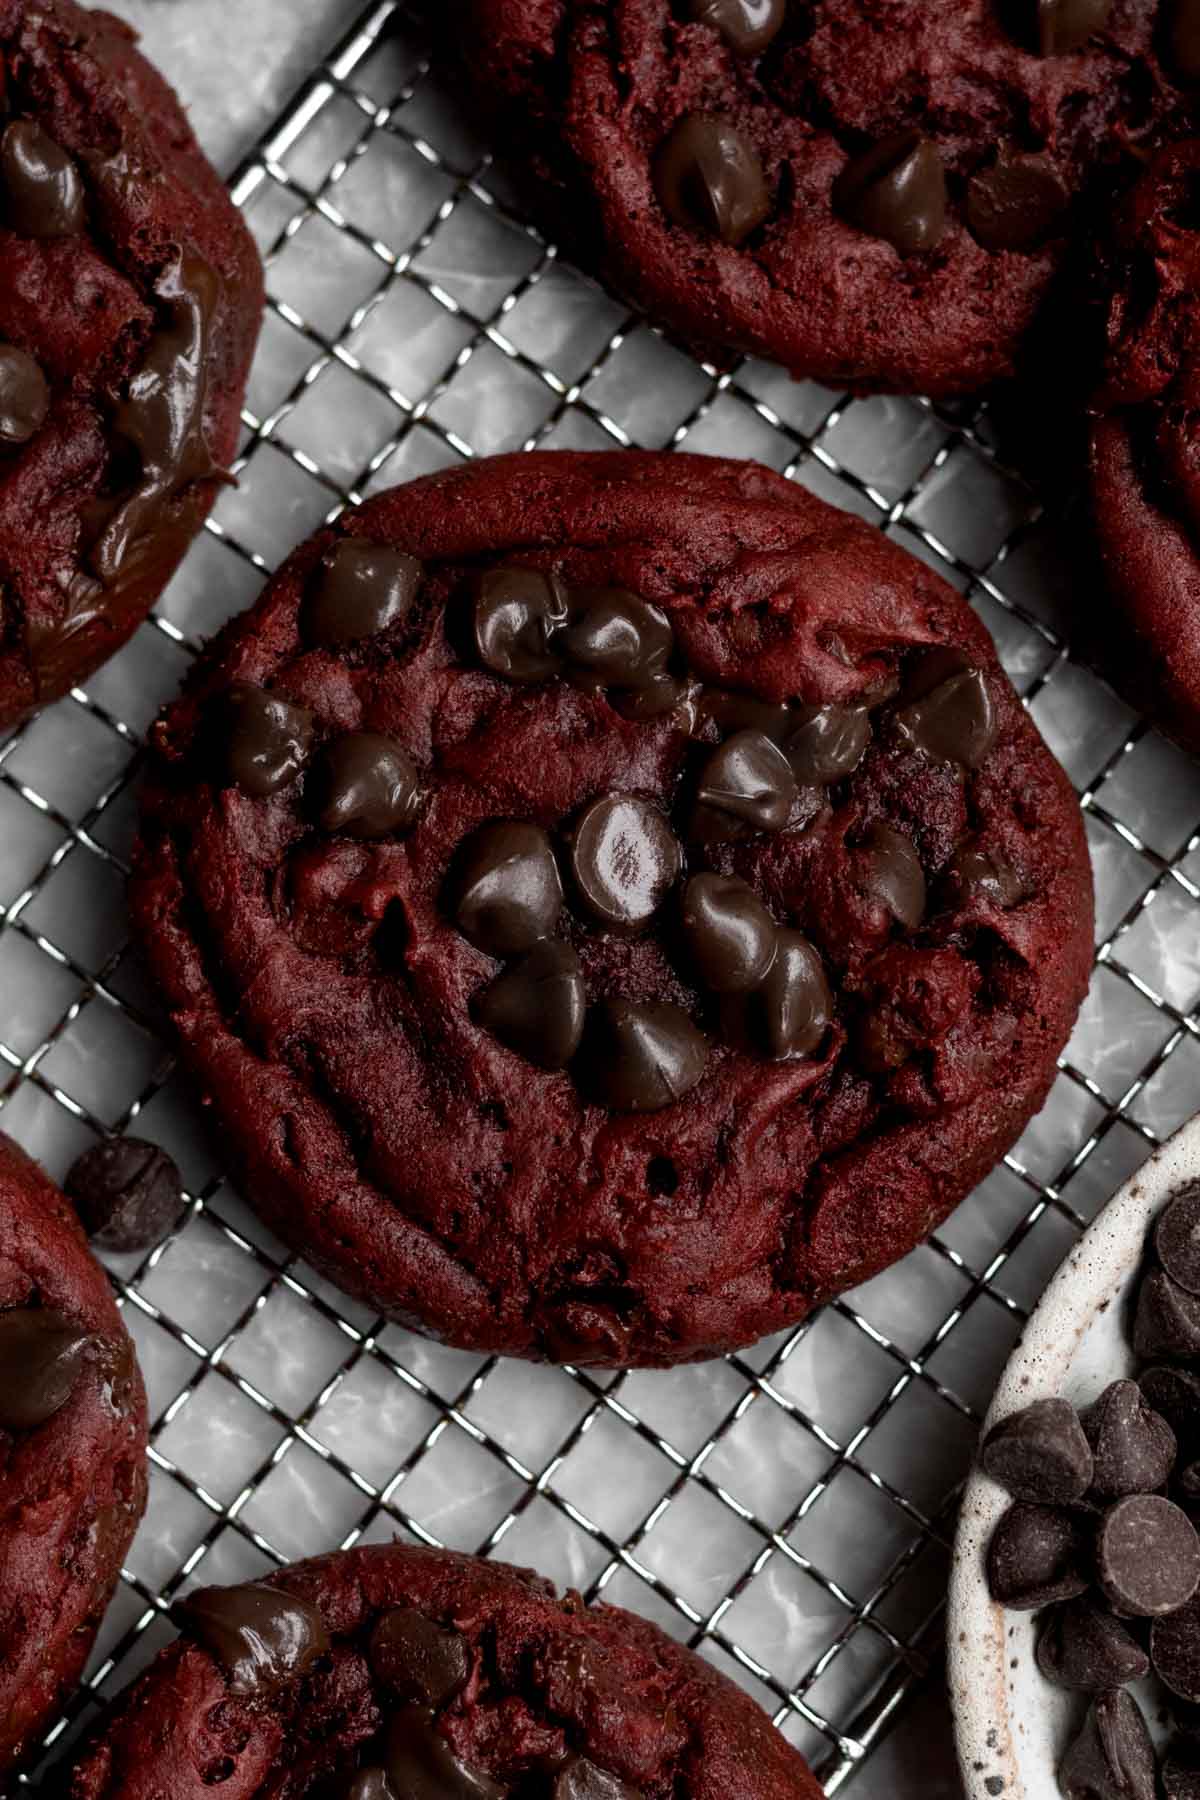 Melted chocolate chips dot the red landscape of the warm and soft cookie.